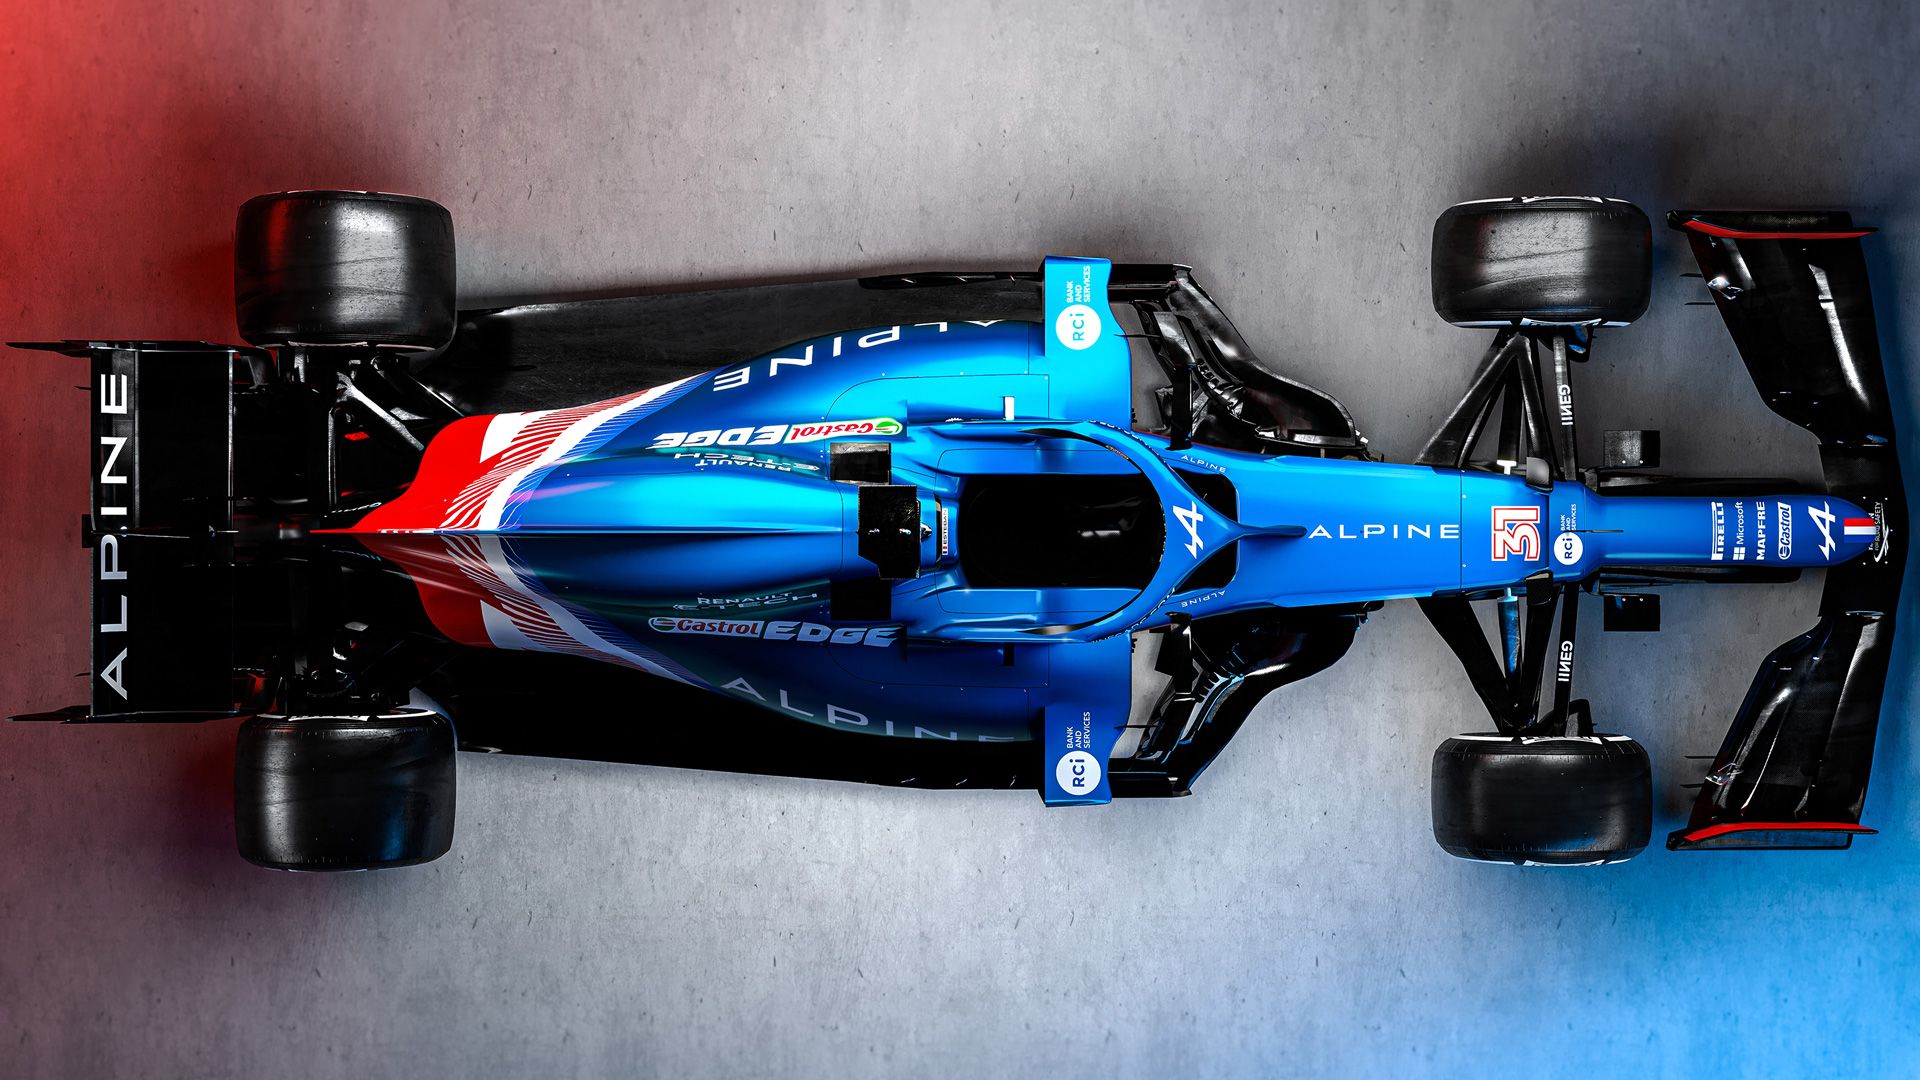 What's underneath that bold new livery? Our first tech take on the Alpine A521. Formula 1®